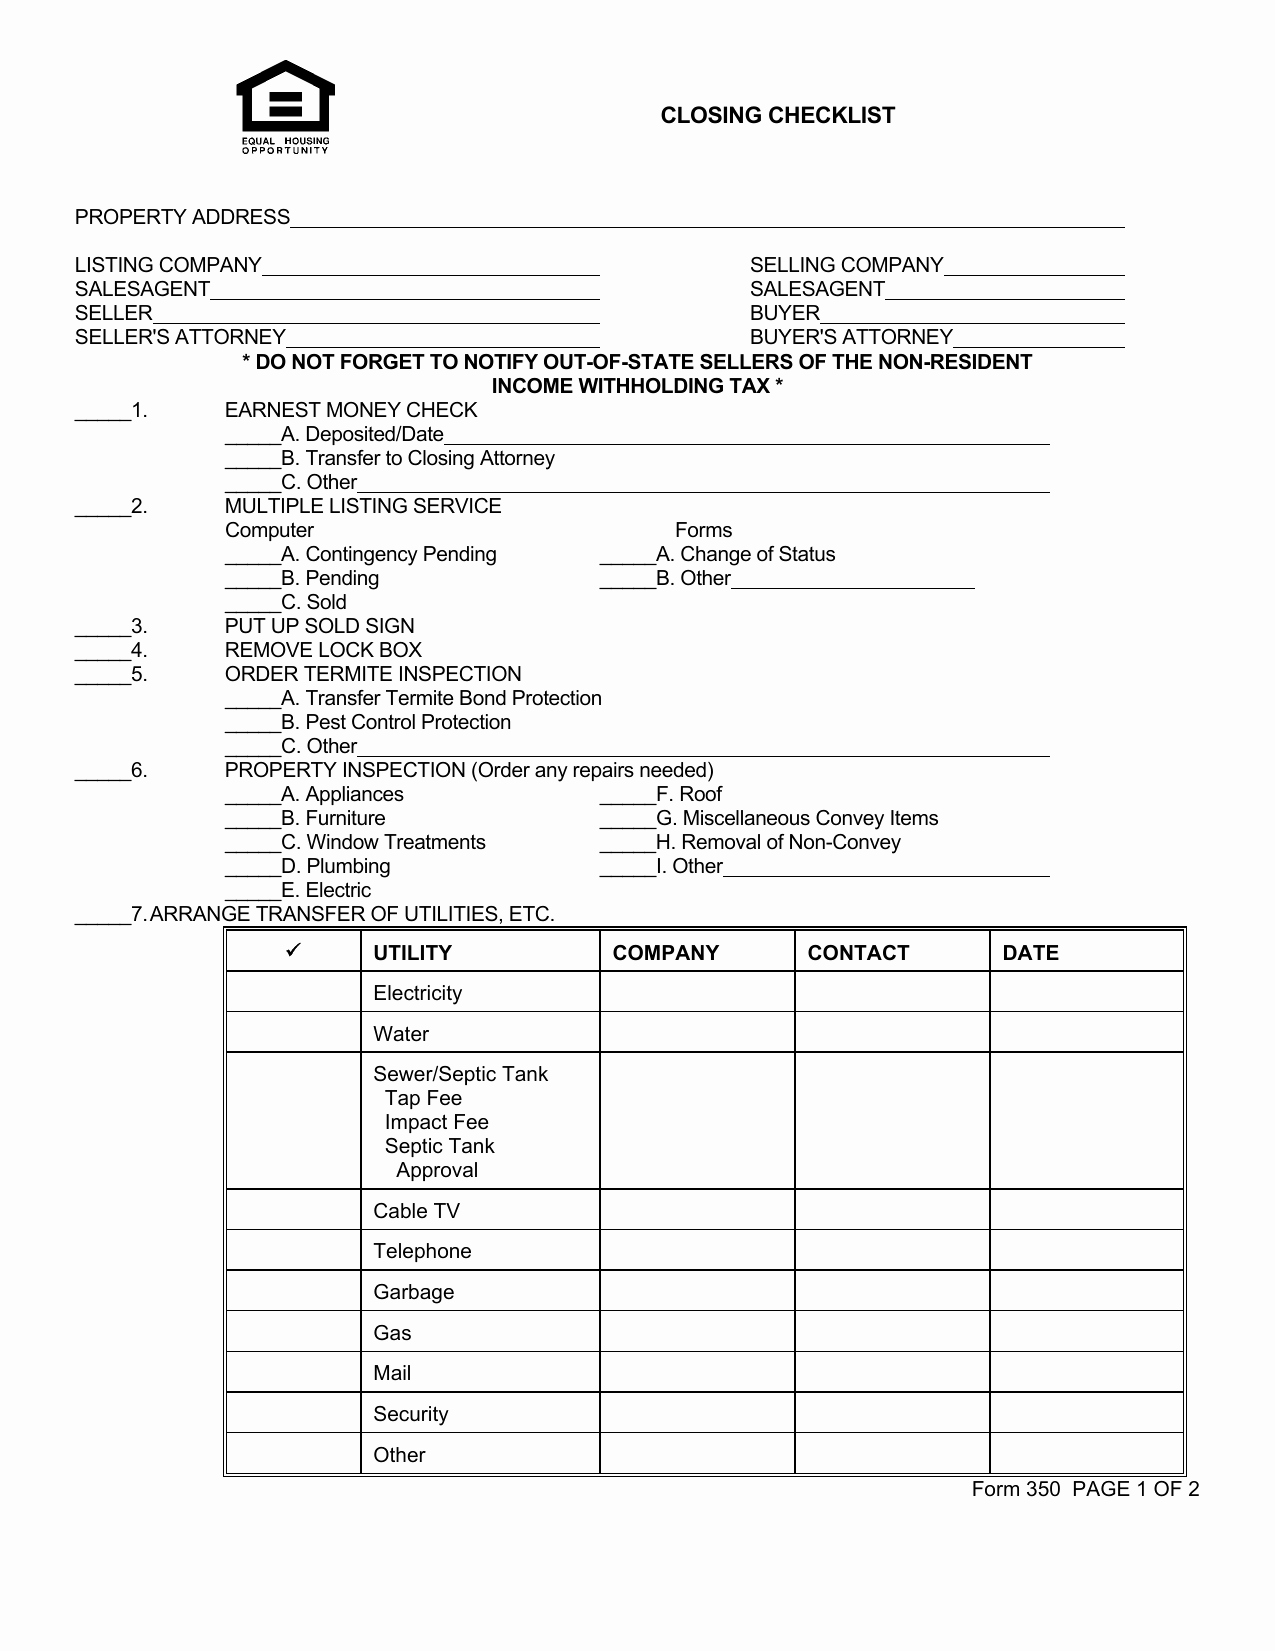 Property Listing form Template Beautiful Download Real Estate Closing Checklist Template